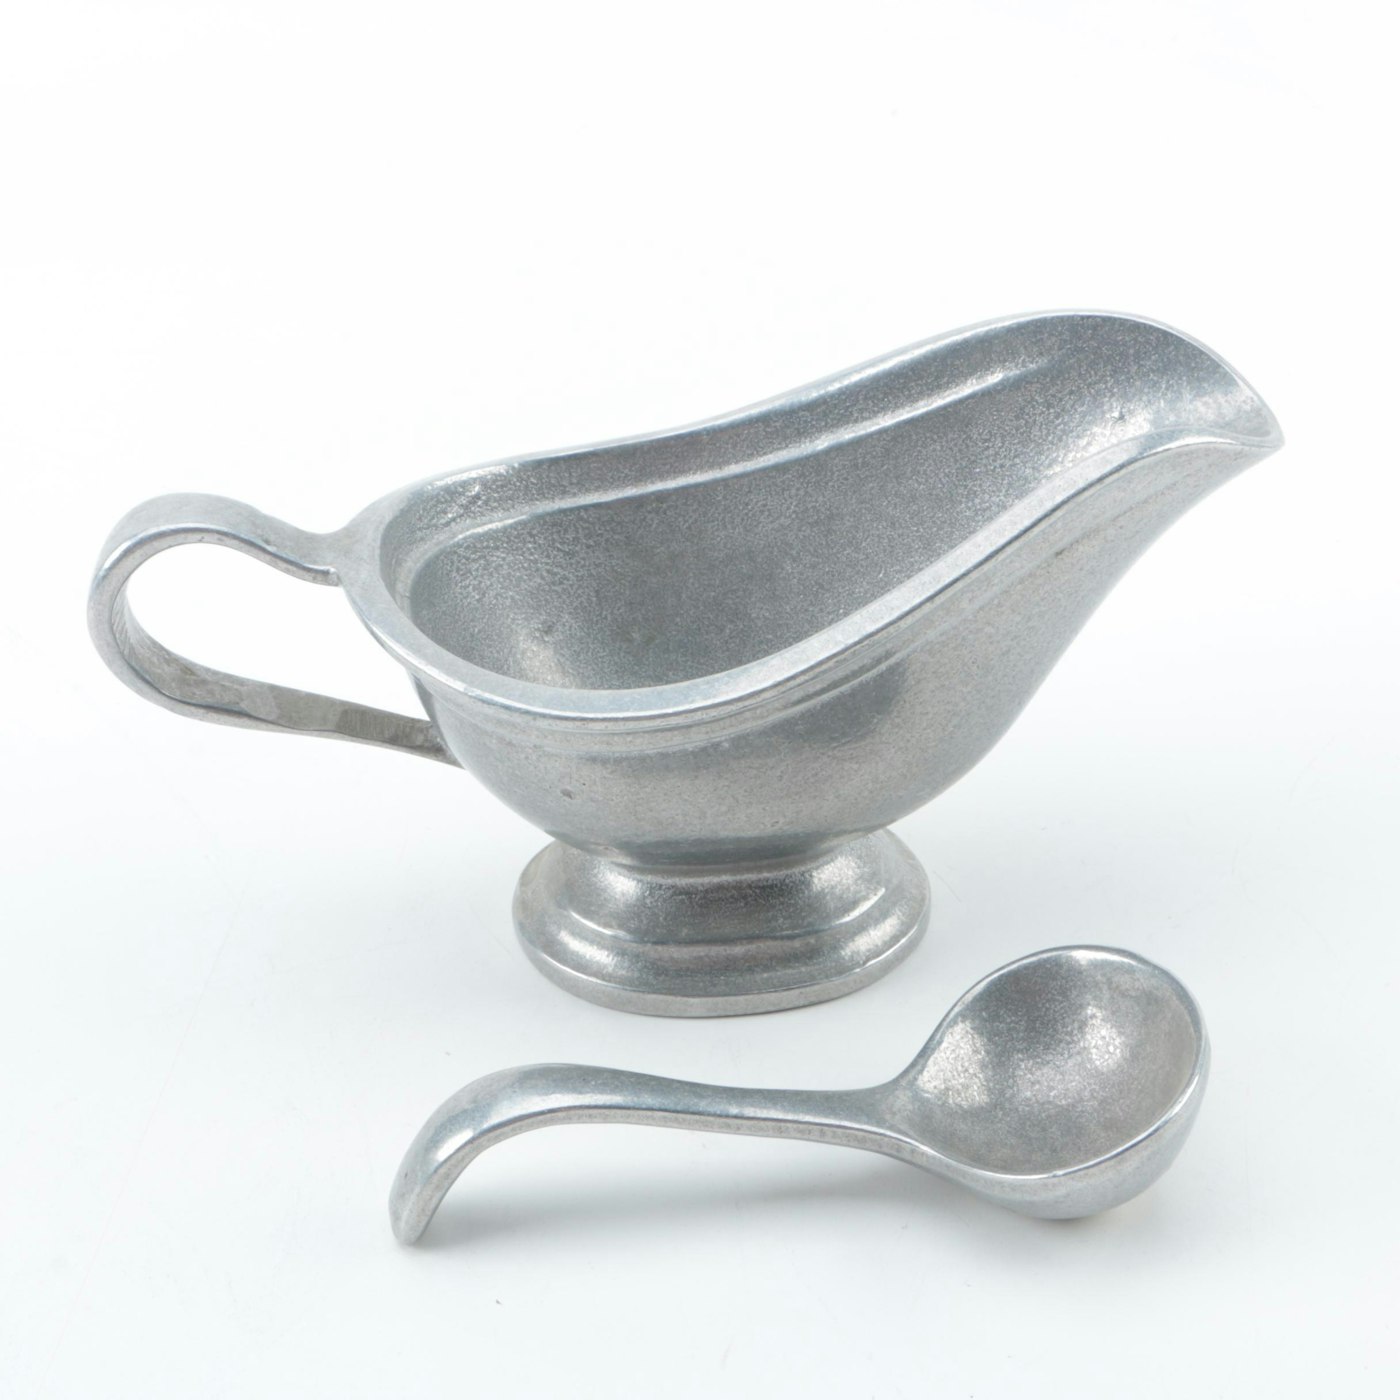 Pewter Tableware Including Carson, Pew-Ta-Rex, Insico, Stede and